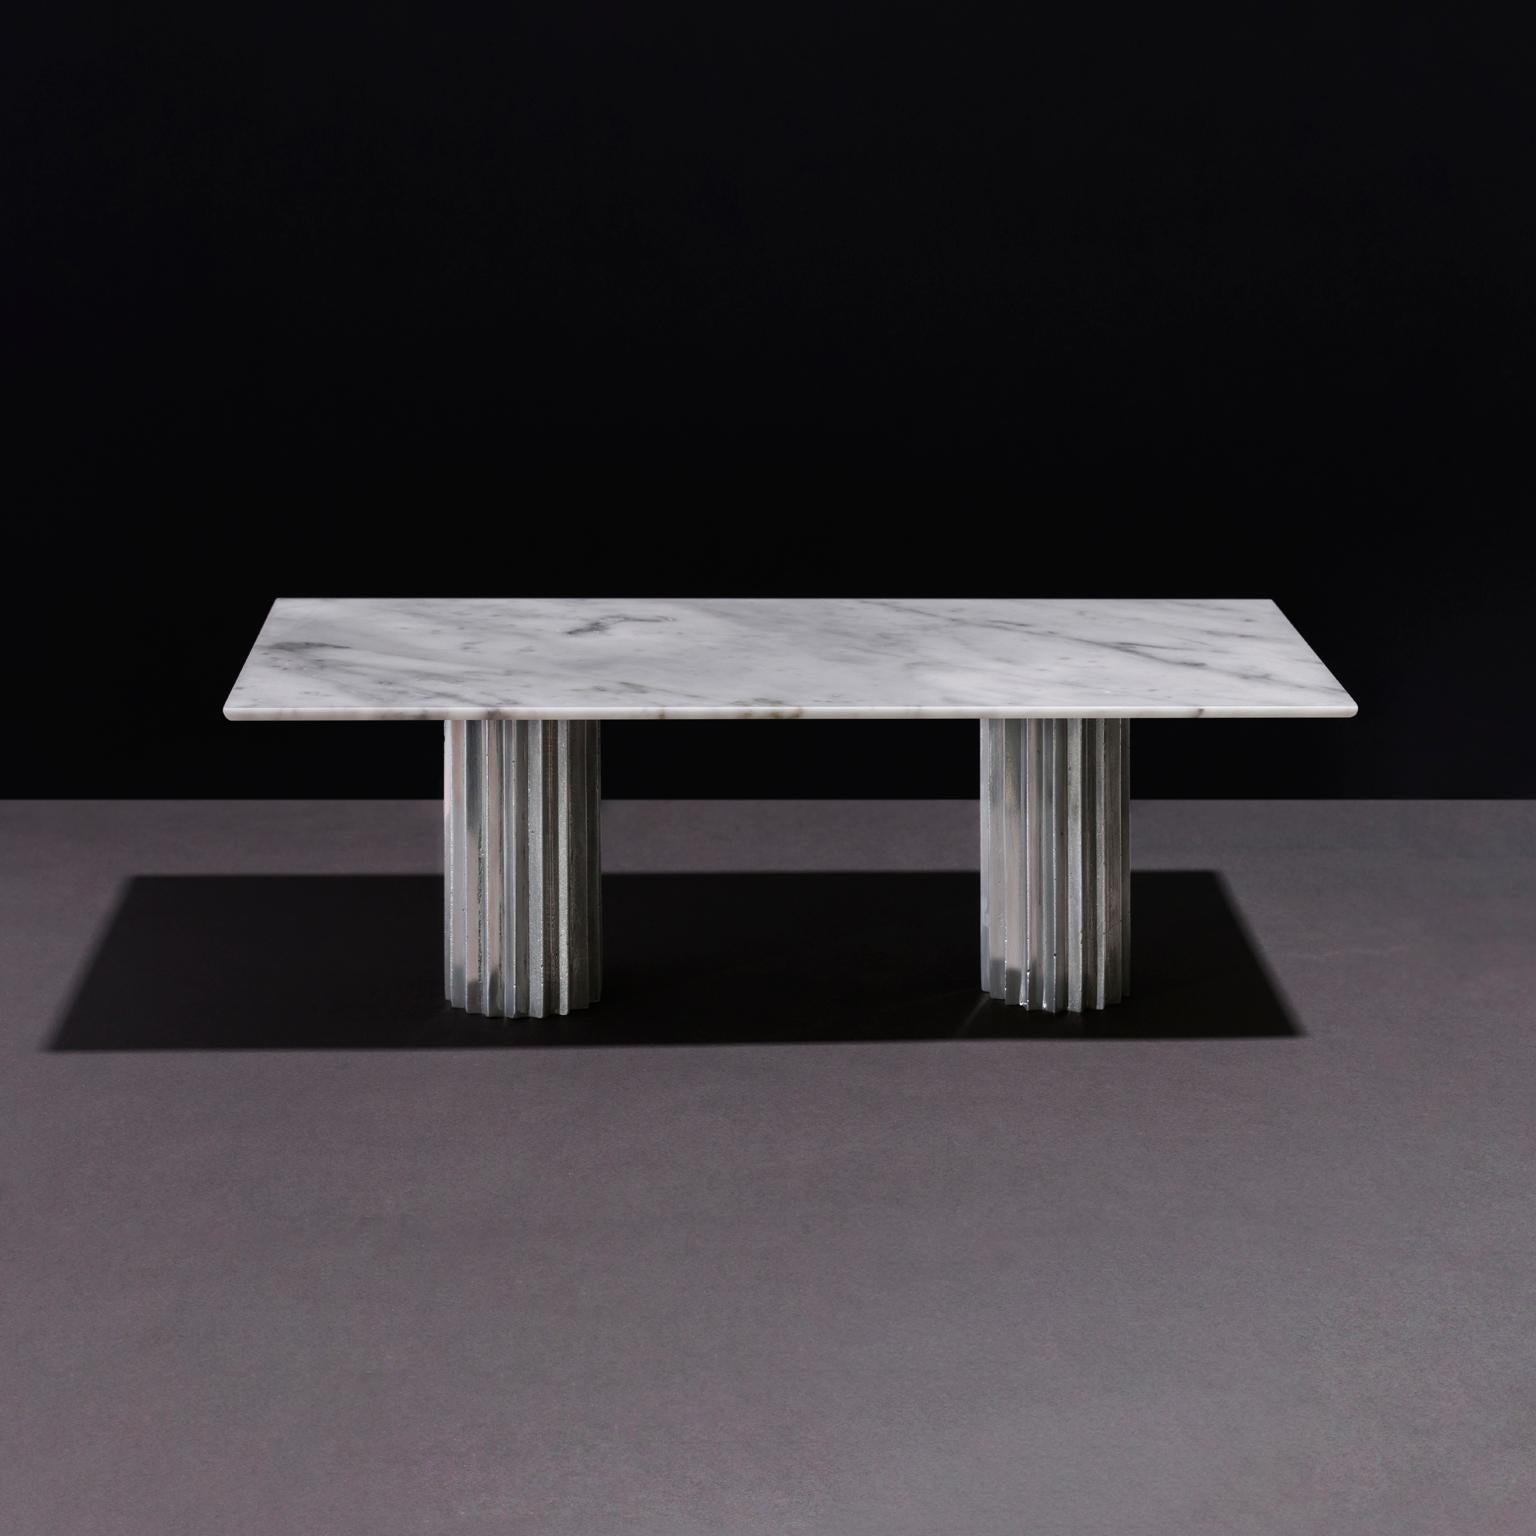 Other Doris White Carrara Marble Rectangular Dining Table by Fred and Juul For Sale